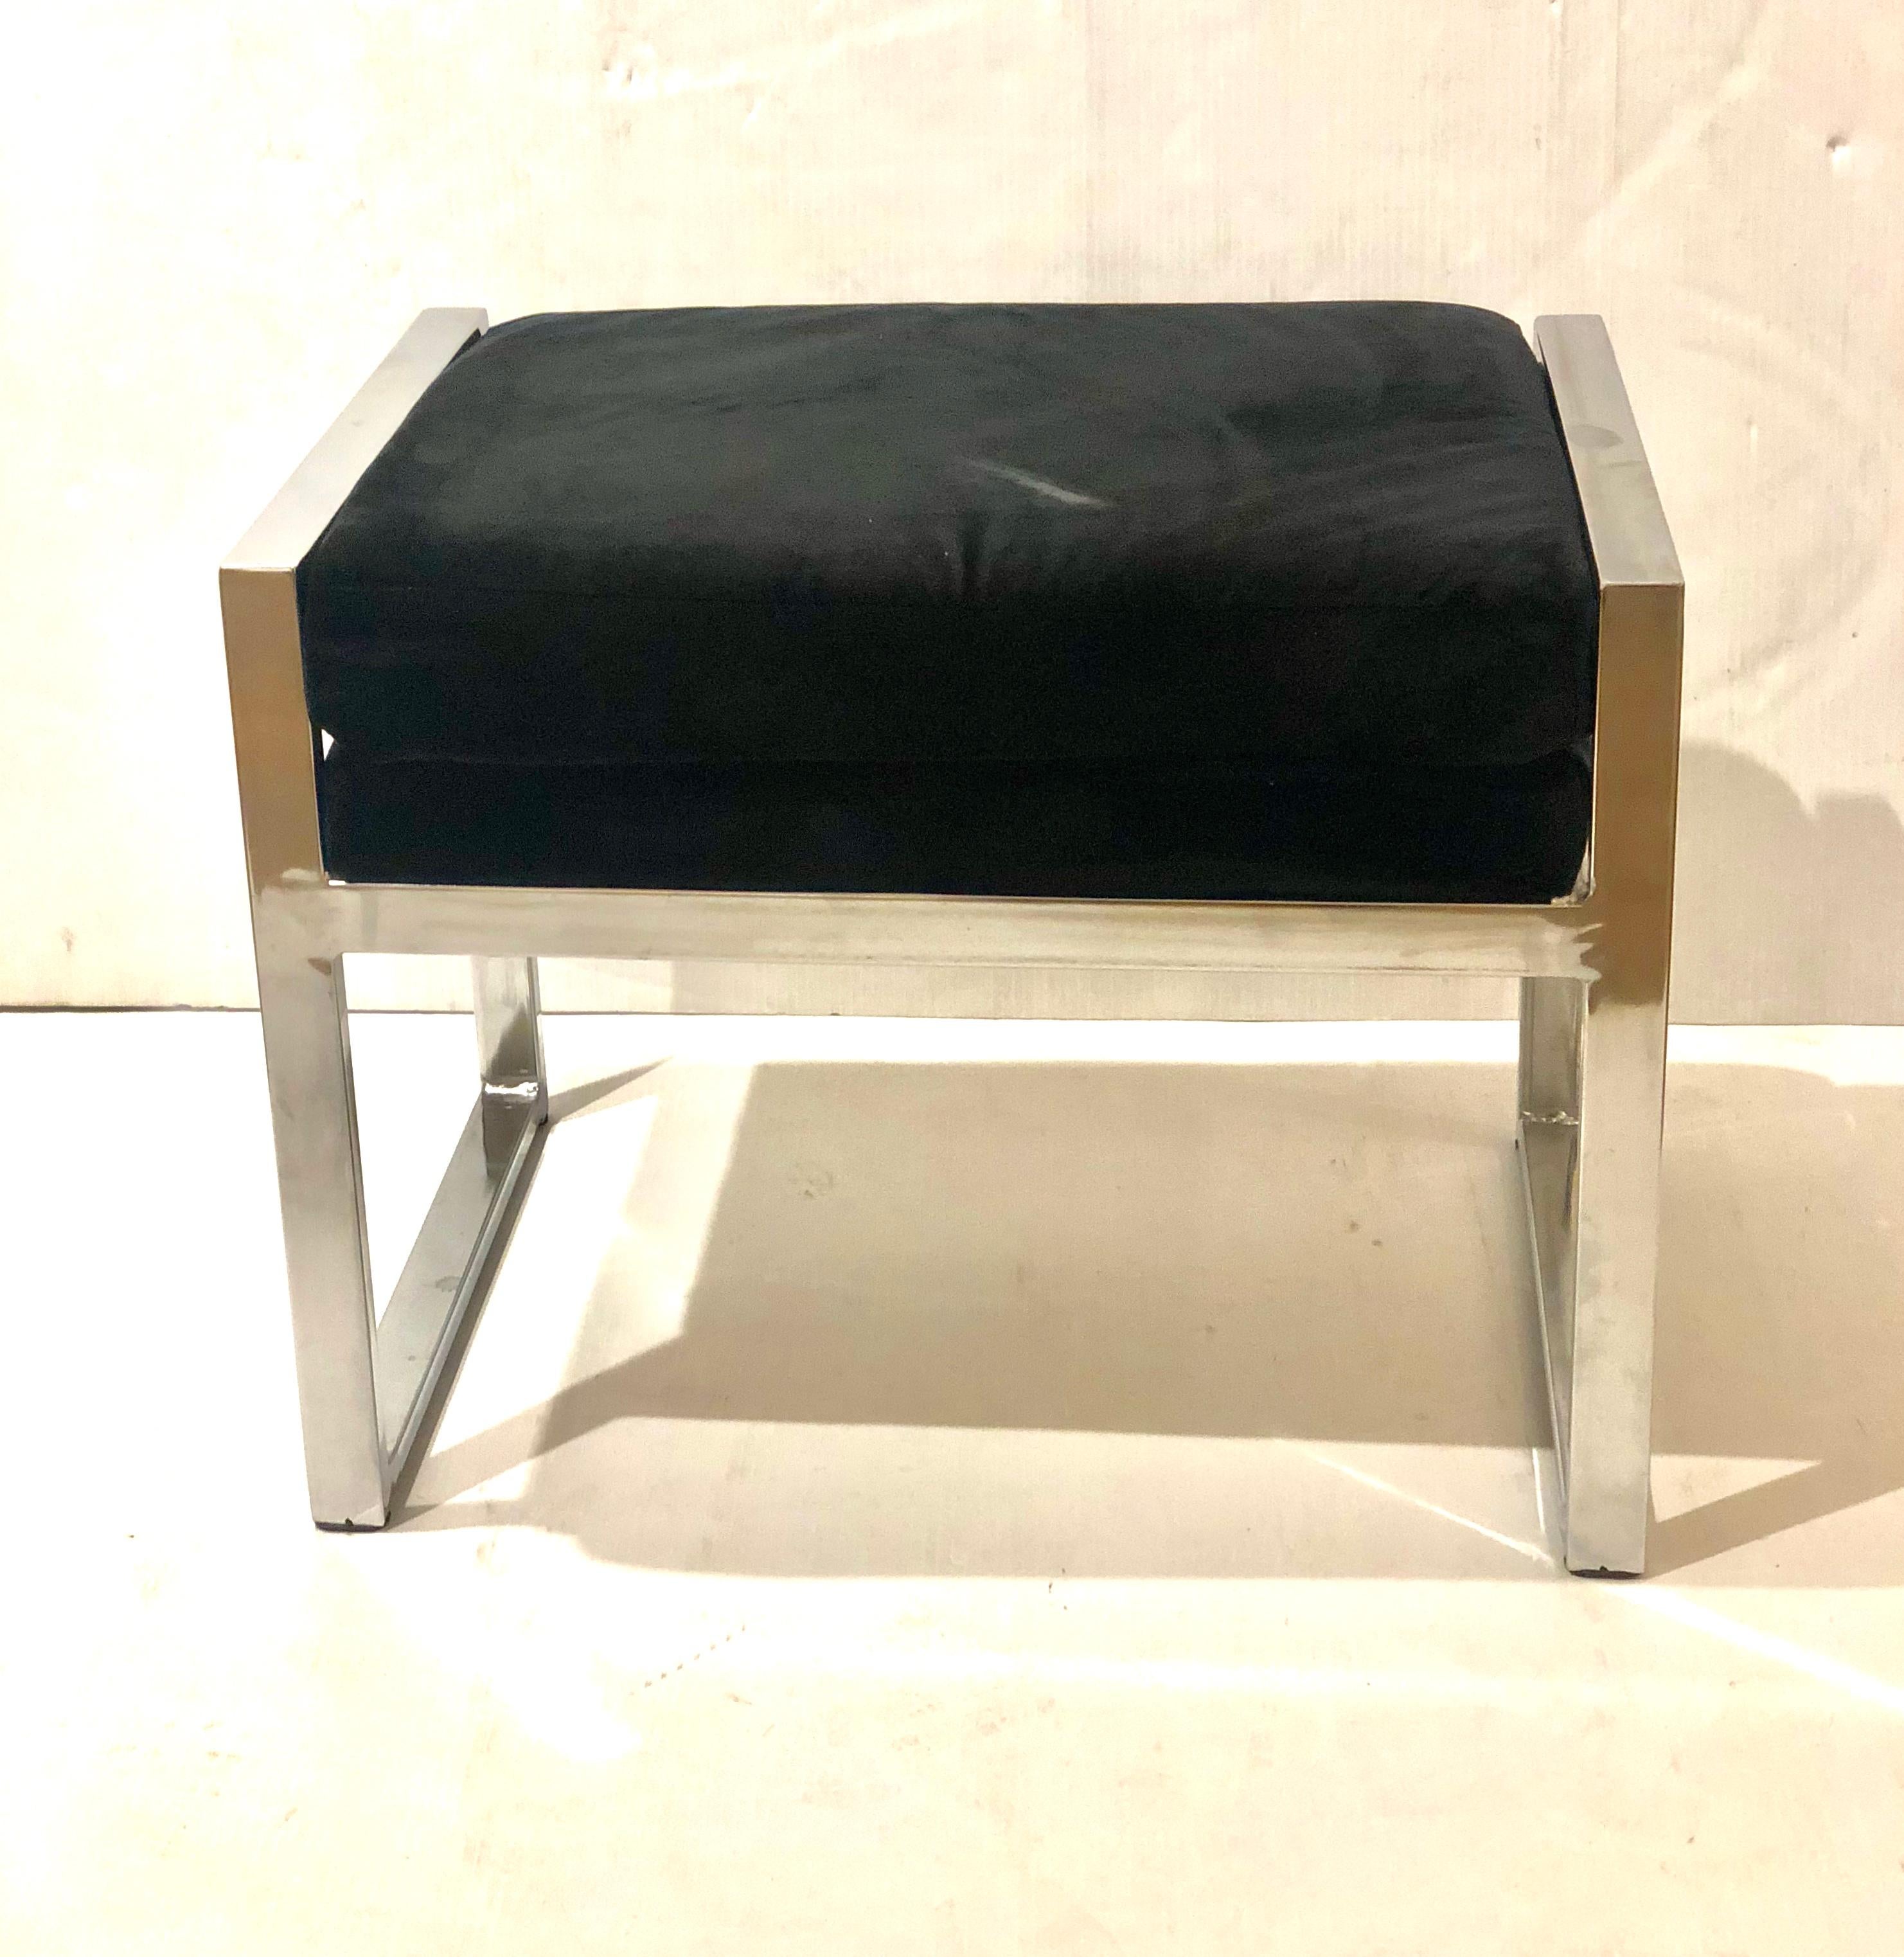 Small versatile vanity stool in chrome finish with black velvet upholstery we have polished the item, its solid and sturdy the material looks very clean with light wear.